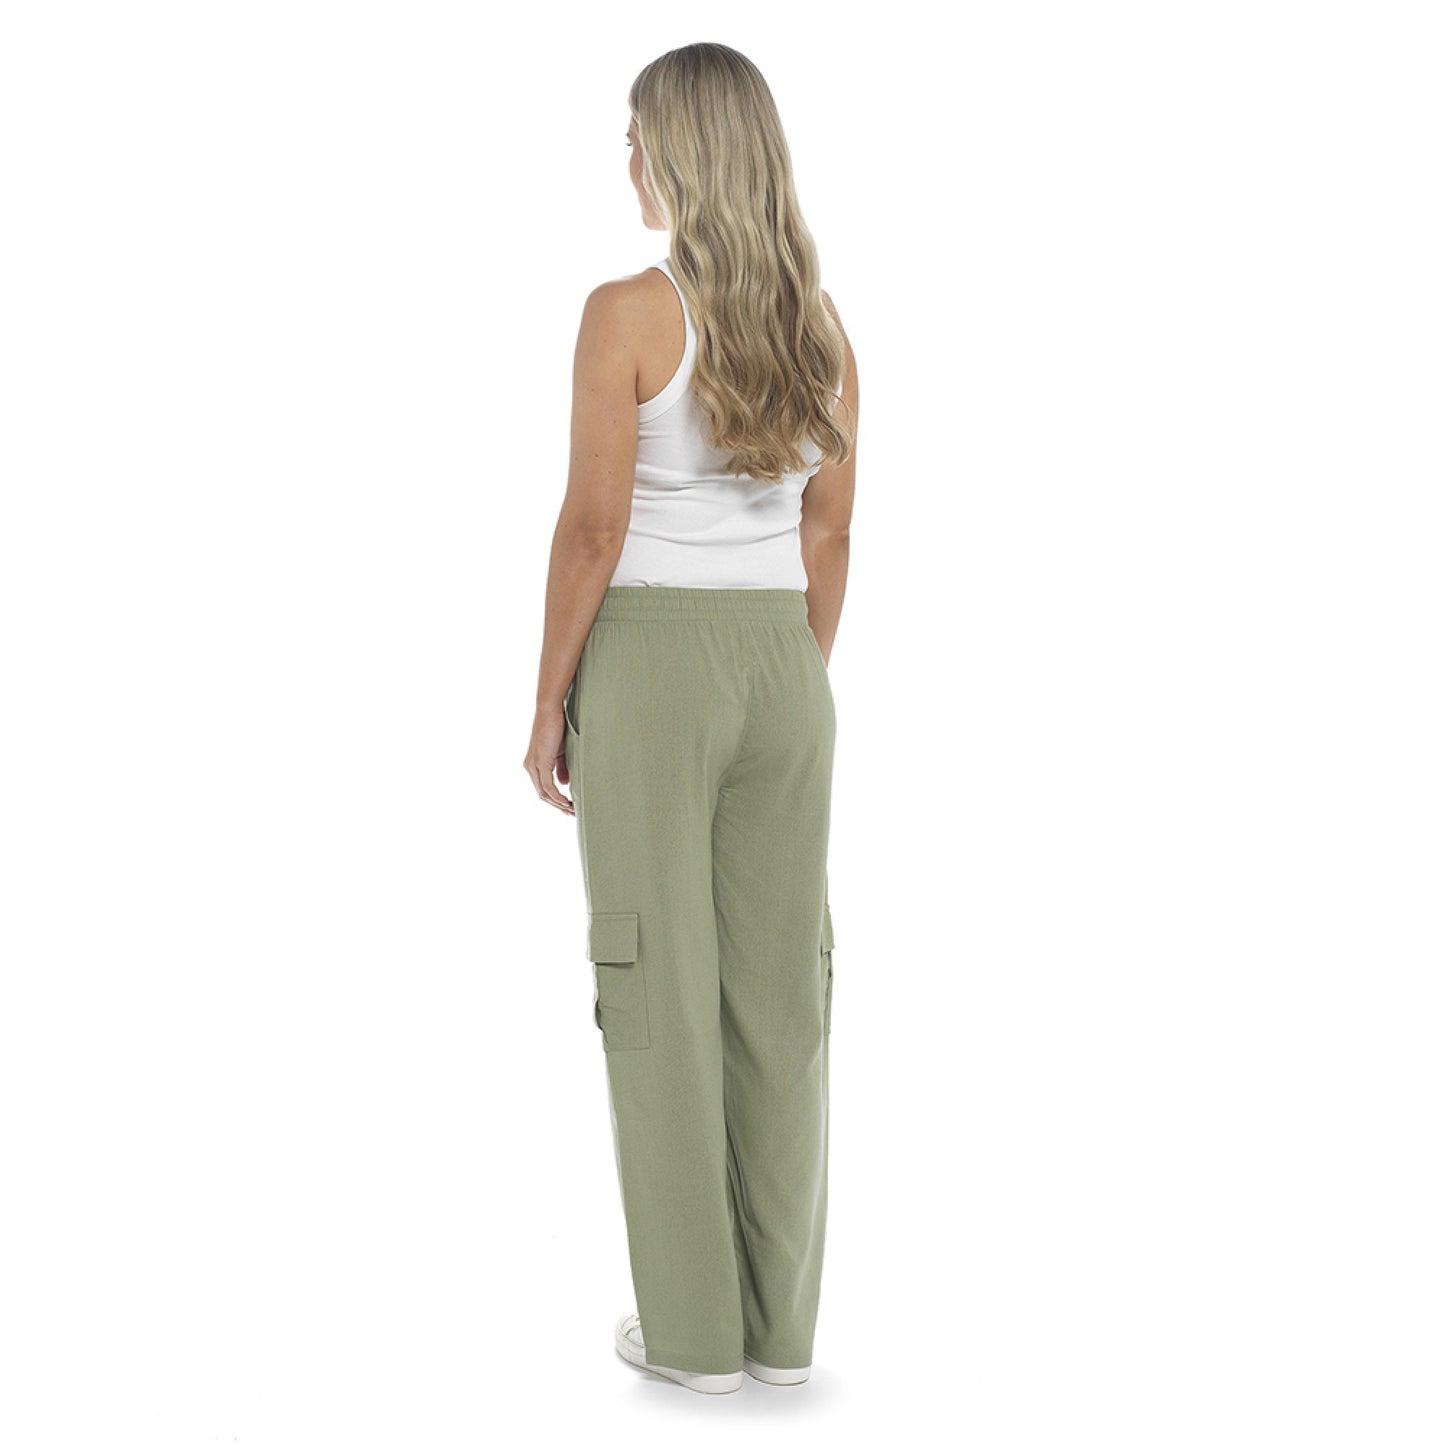 Ladies Linen Blend Cargo Pants Lightweight Casual Summer Utility Trousers